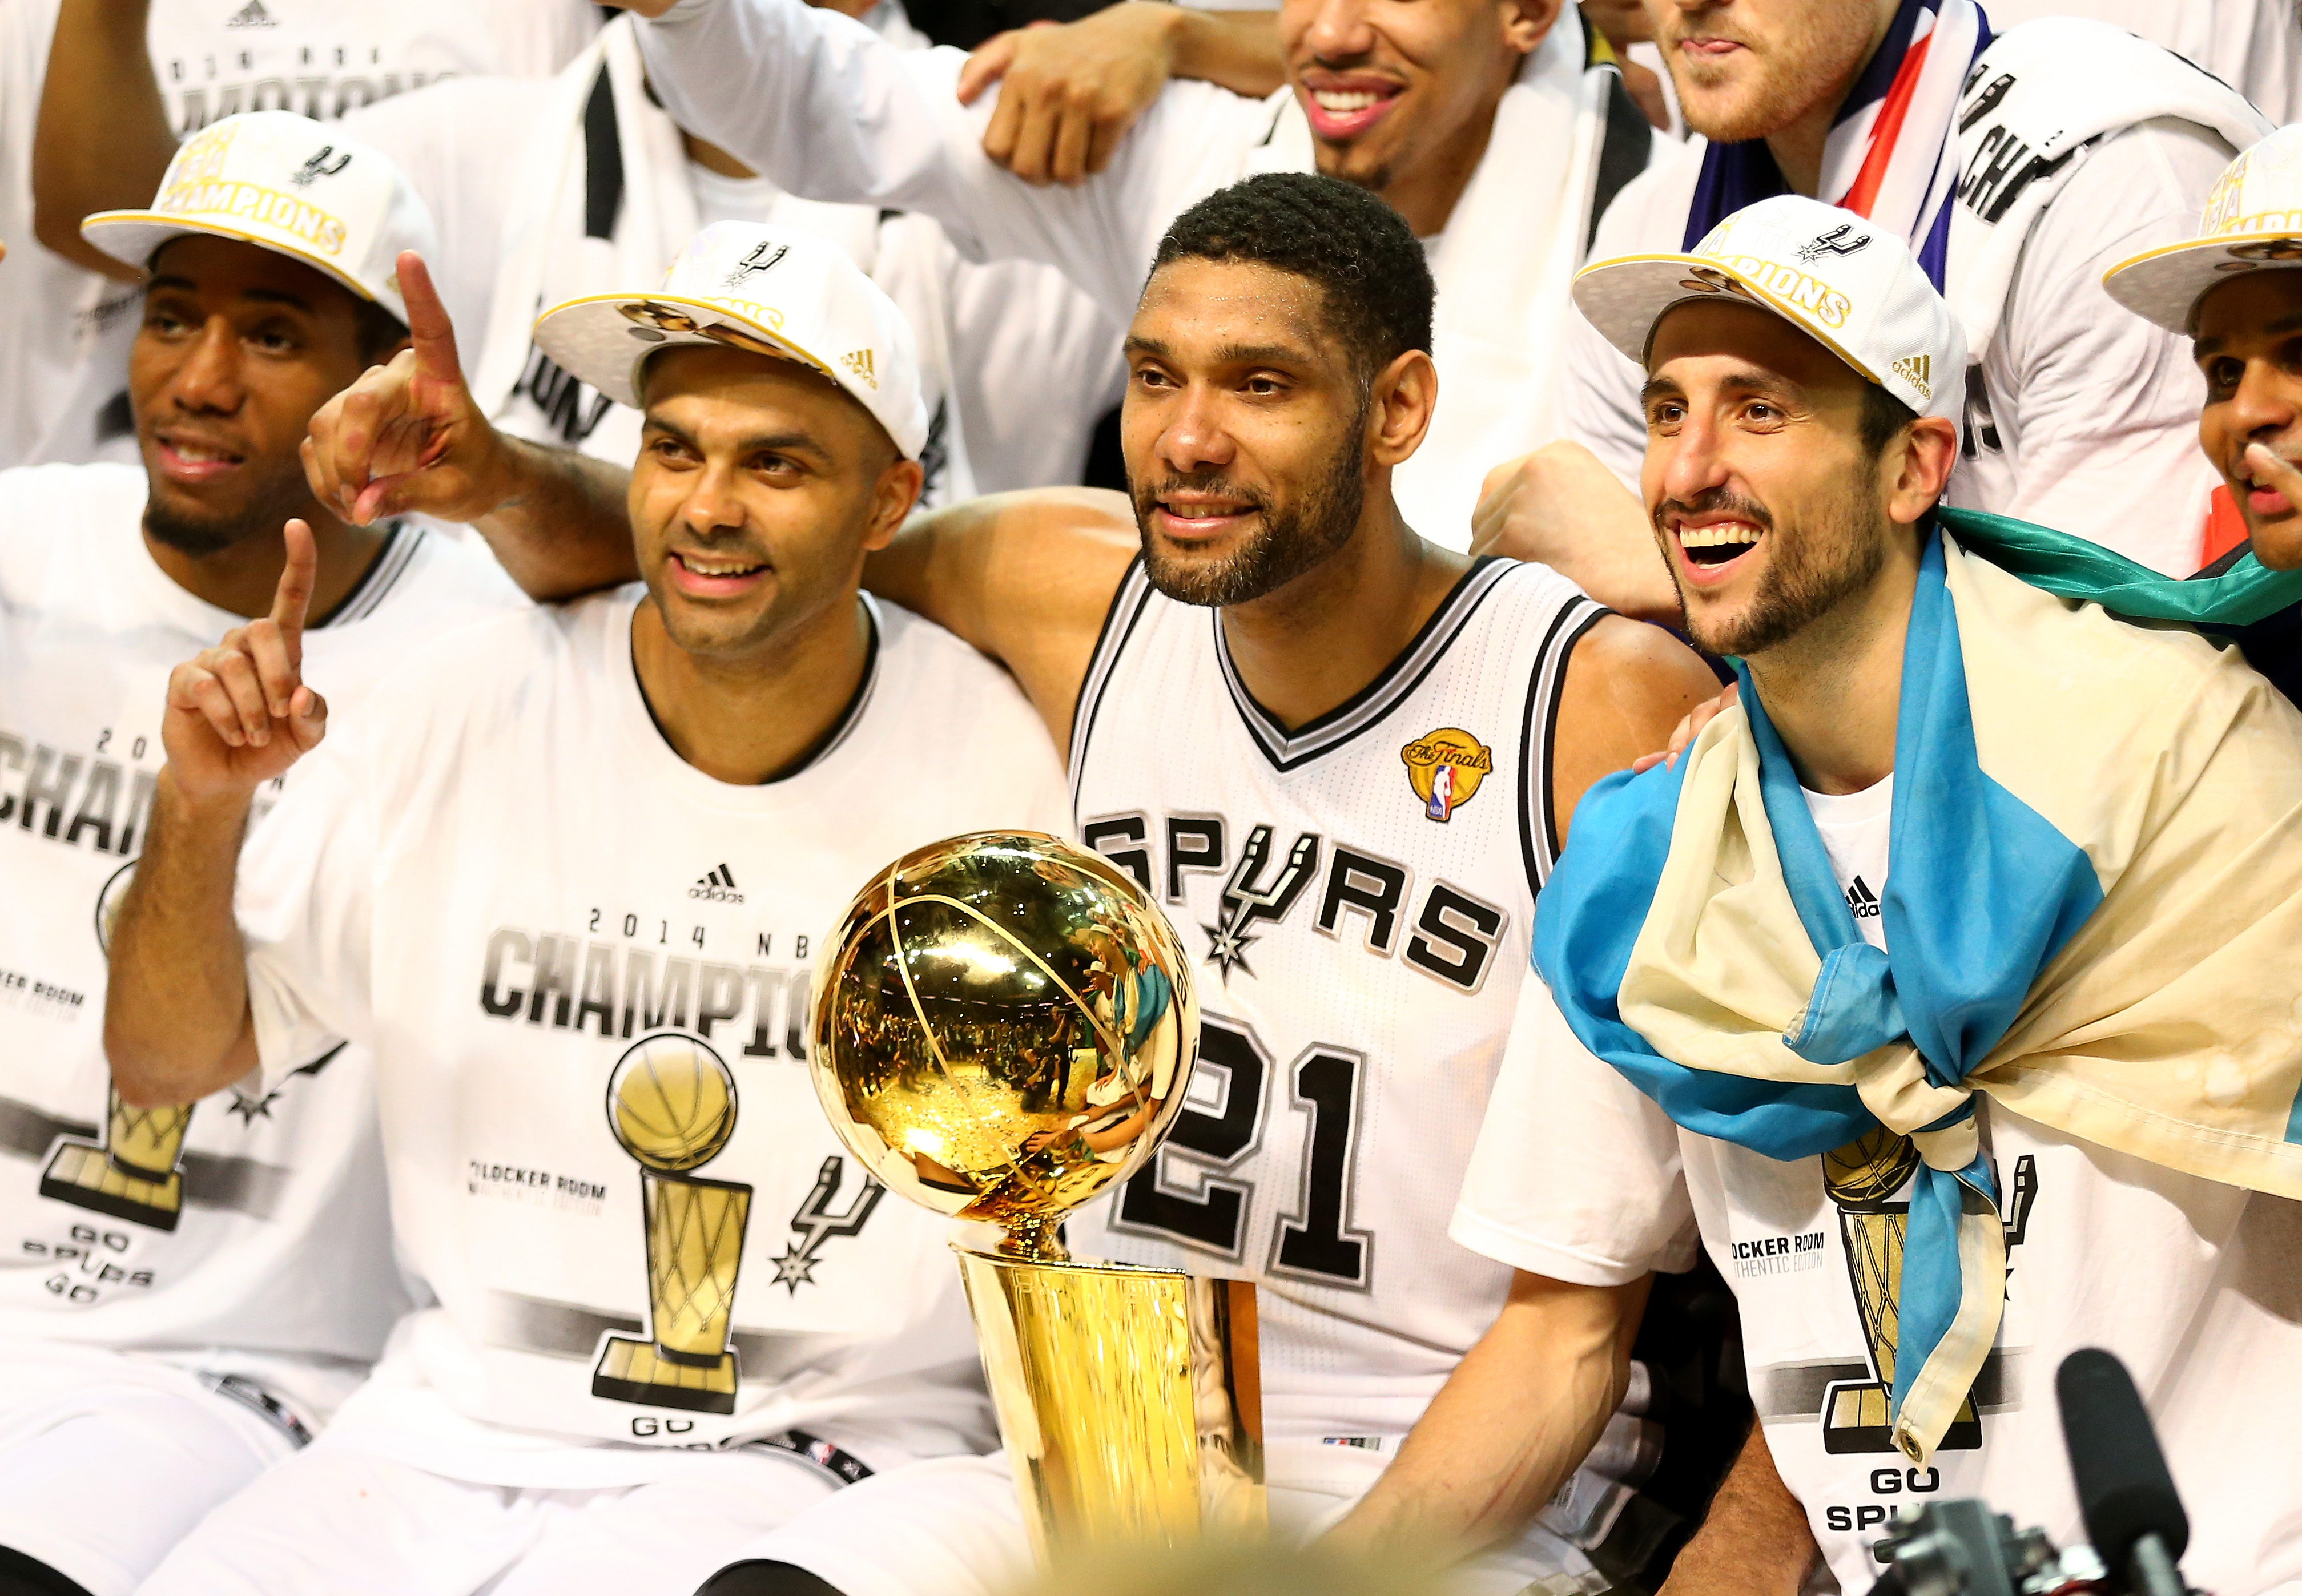 Tony Parker #9 and Tim Duncan #21, and Manu Ginobili #20 of the San Antonio Spurs celebrate after defeating the Miami Heat in Game Five of the 2014 NBA Finals at the AT&amp;T Center on June 15, 2014 in San Antonio, Texas. (Andy Lyons&mdash;Getty Images)